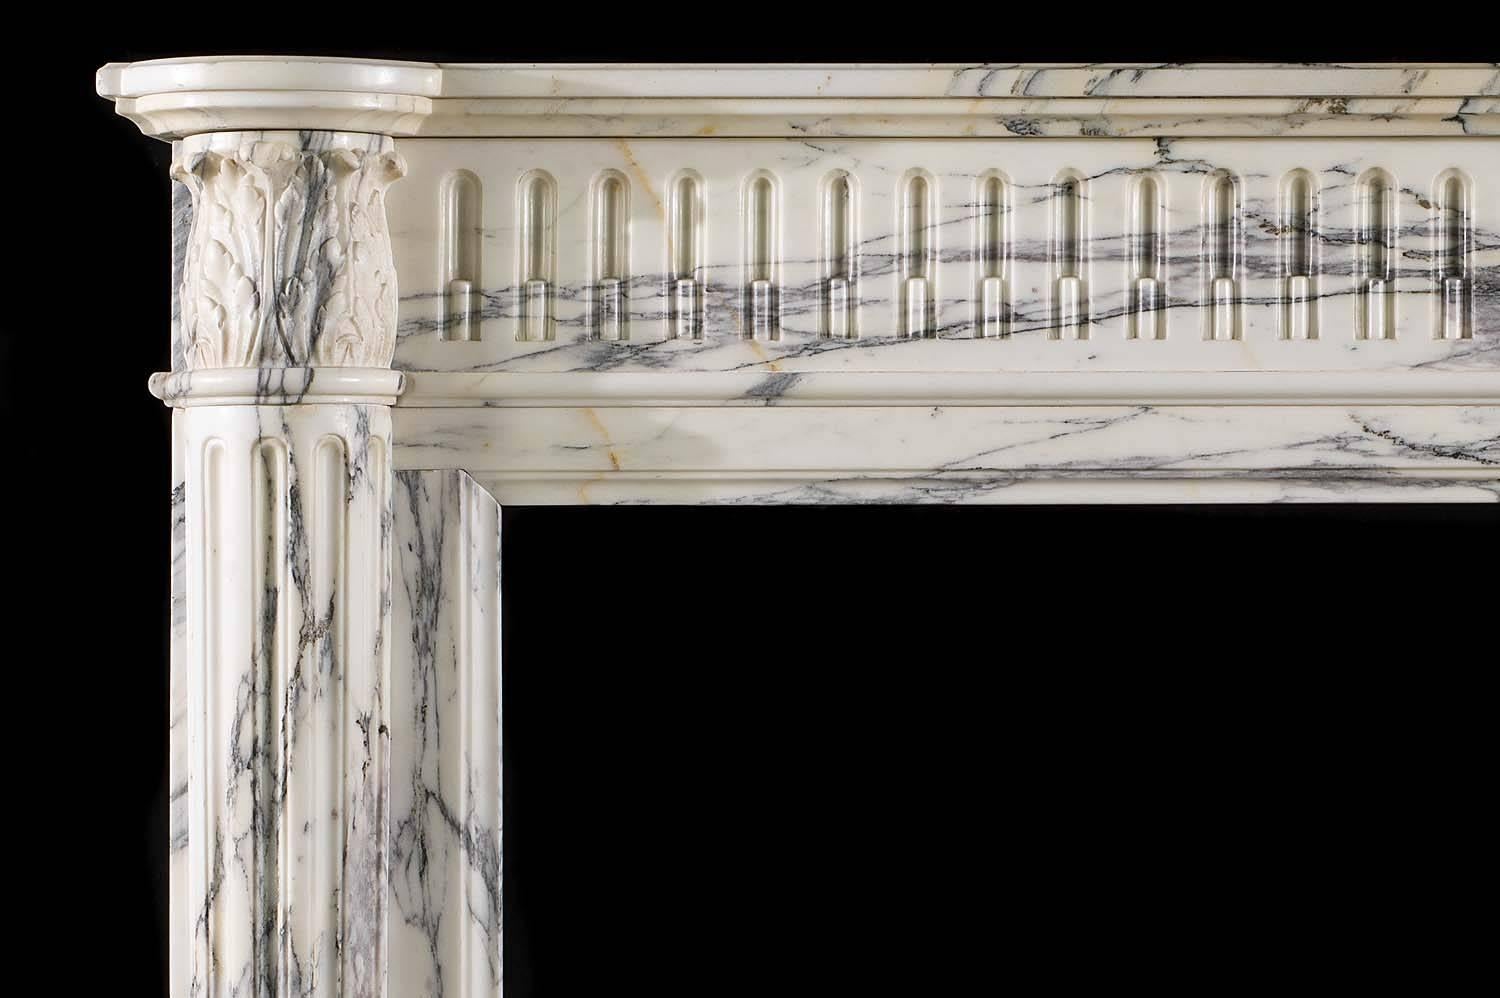 A small compact Louis XVI antique fireplace in elegantly veined Arabescato marble. The simple shelf rests over a carved stop-fluted frieze, flanked by acanthus leaf capitals supported on half round pilasters,

French, early 19th century.

(Price